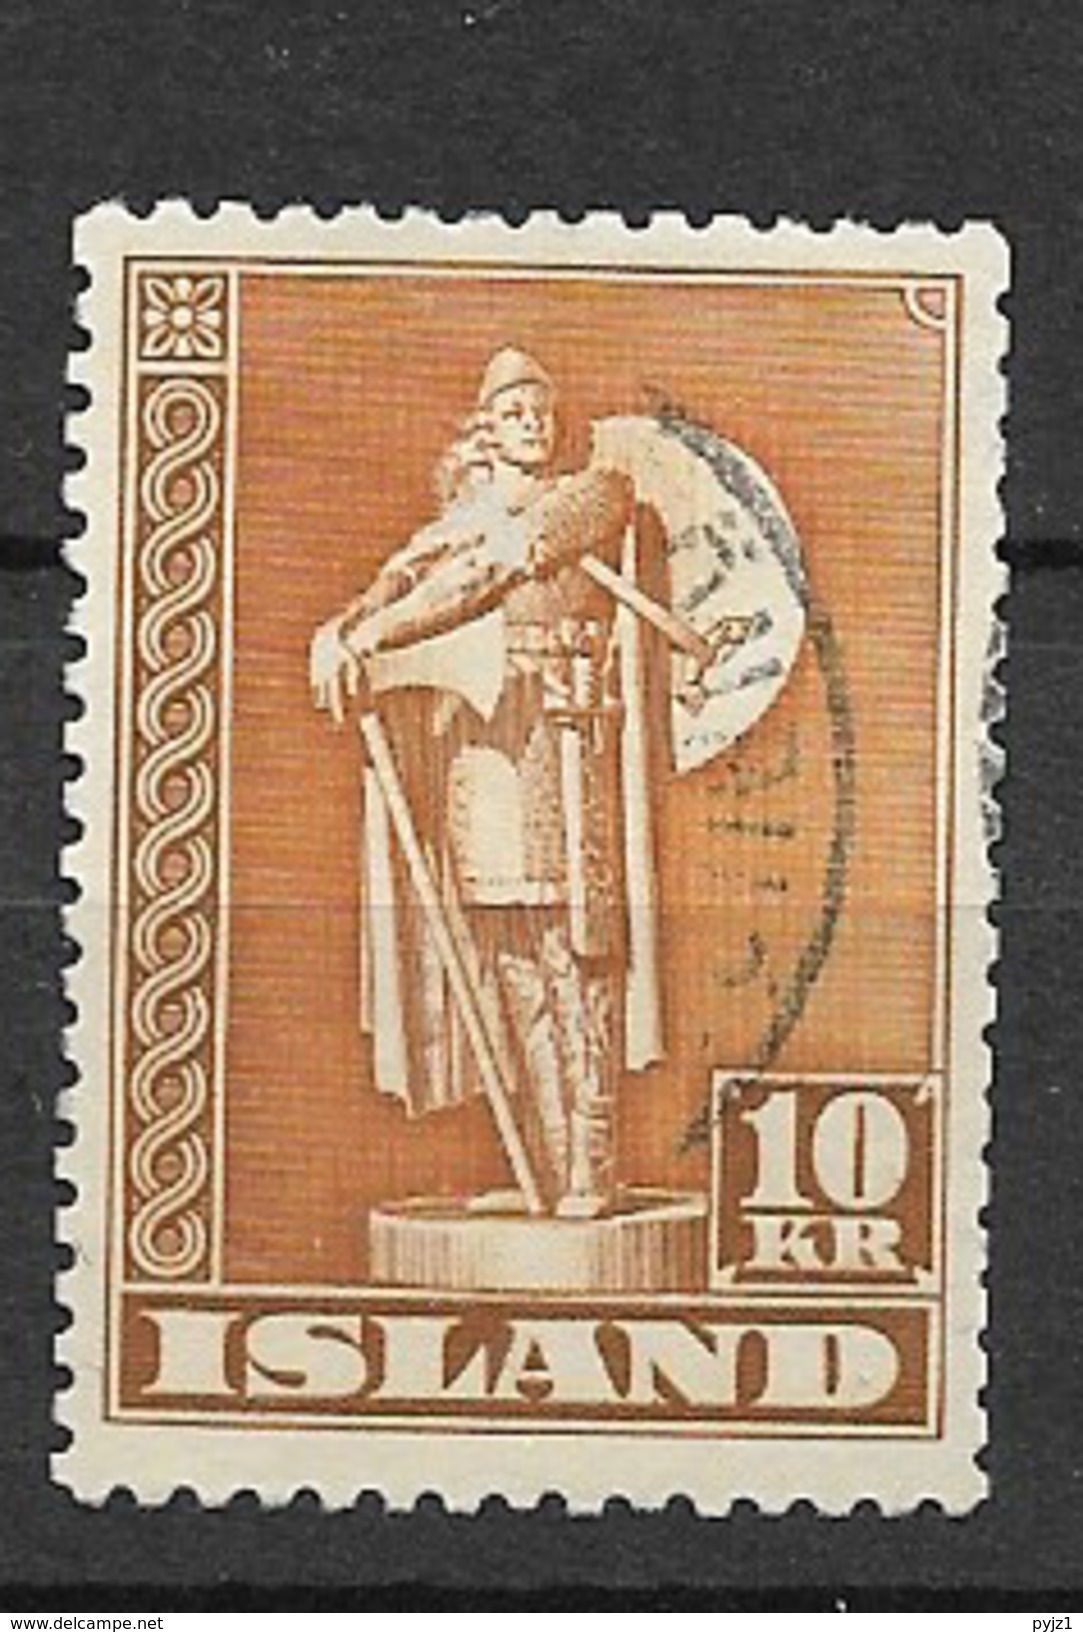 1948 USED Iceland Perf 14 - Used Stamps